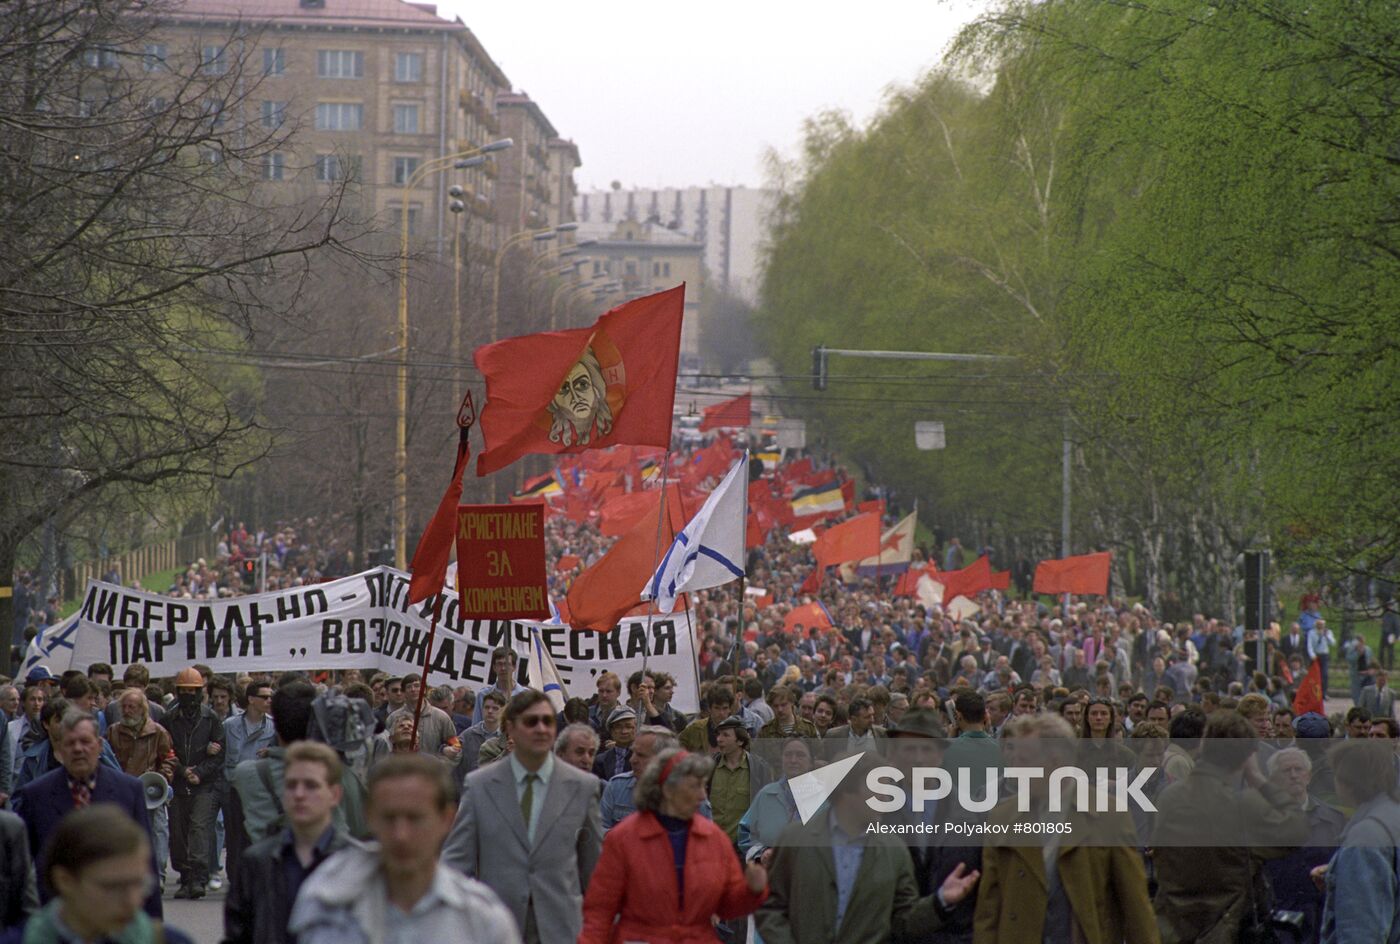 May Day demonstration